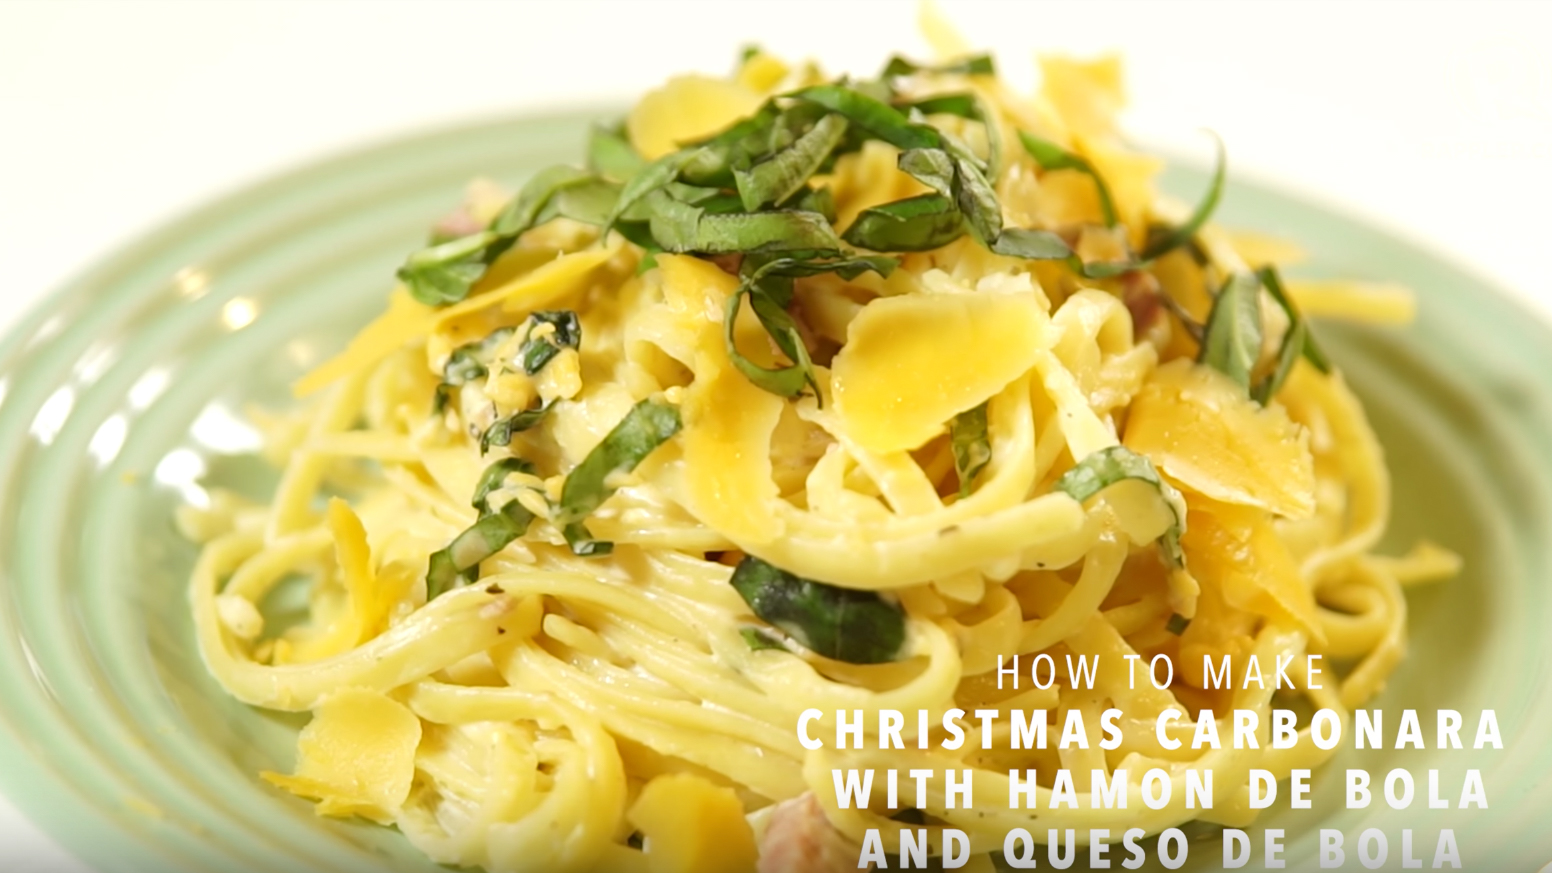 CARBONARA. Make the most out of your Christmas ham and cheese with this delicious and easy to make carbonara.  